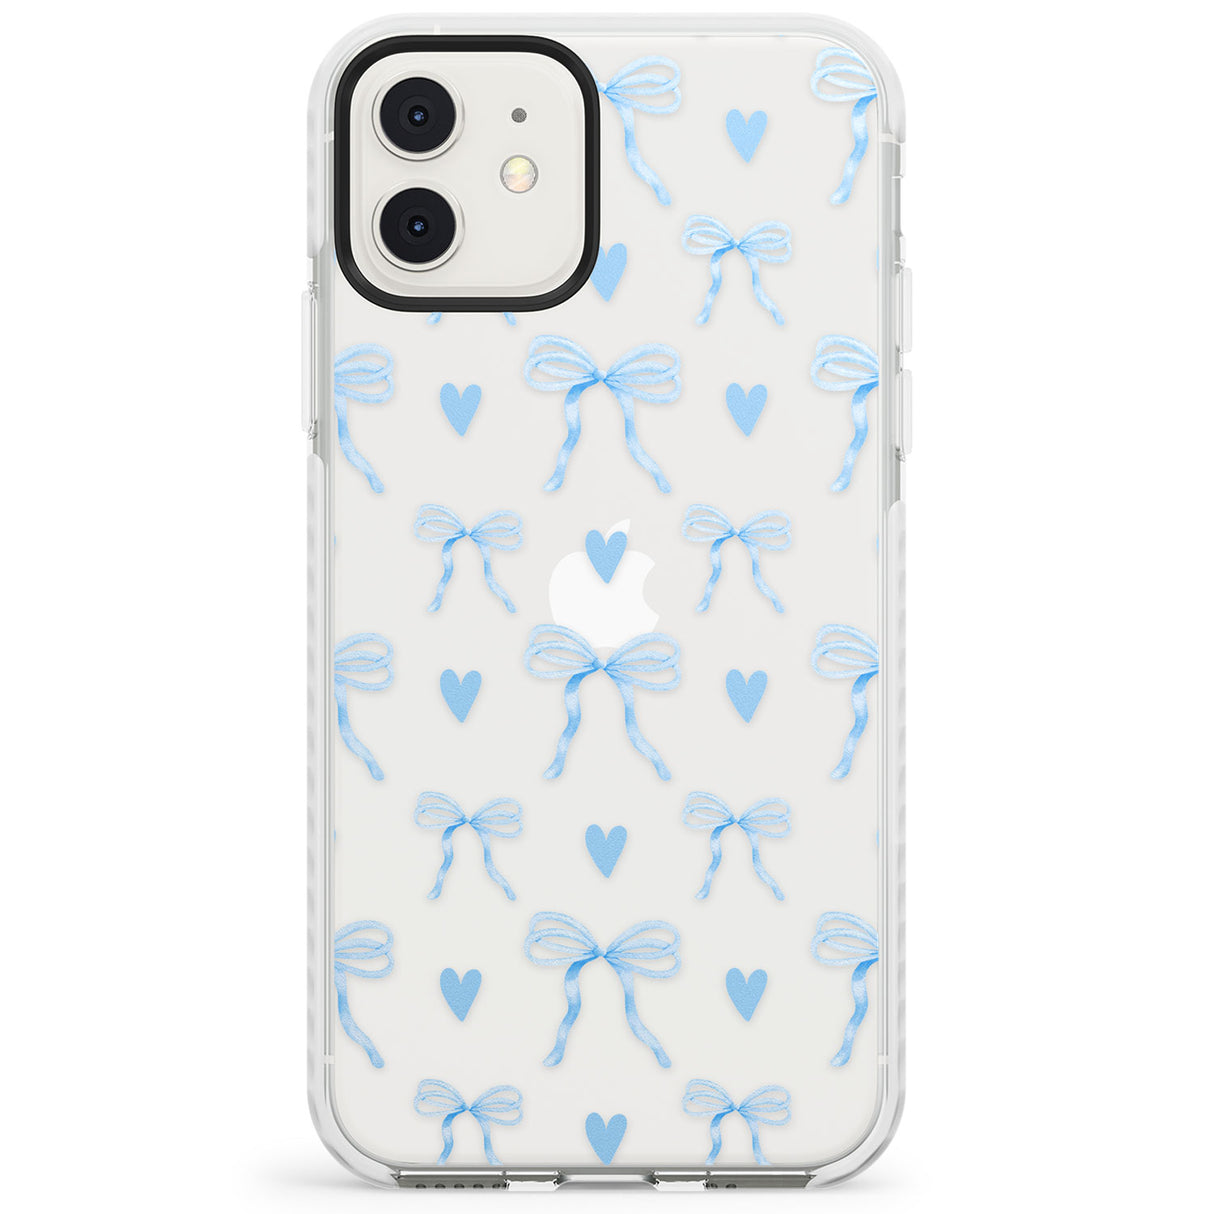 Blue Bows & Hearts Impact Phone Case for iPhone 11, iphone 12